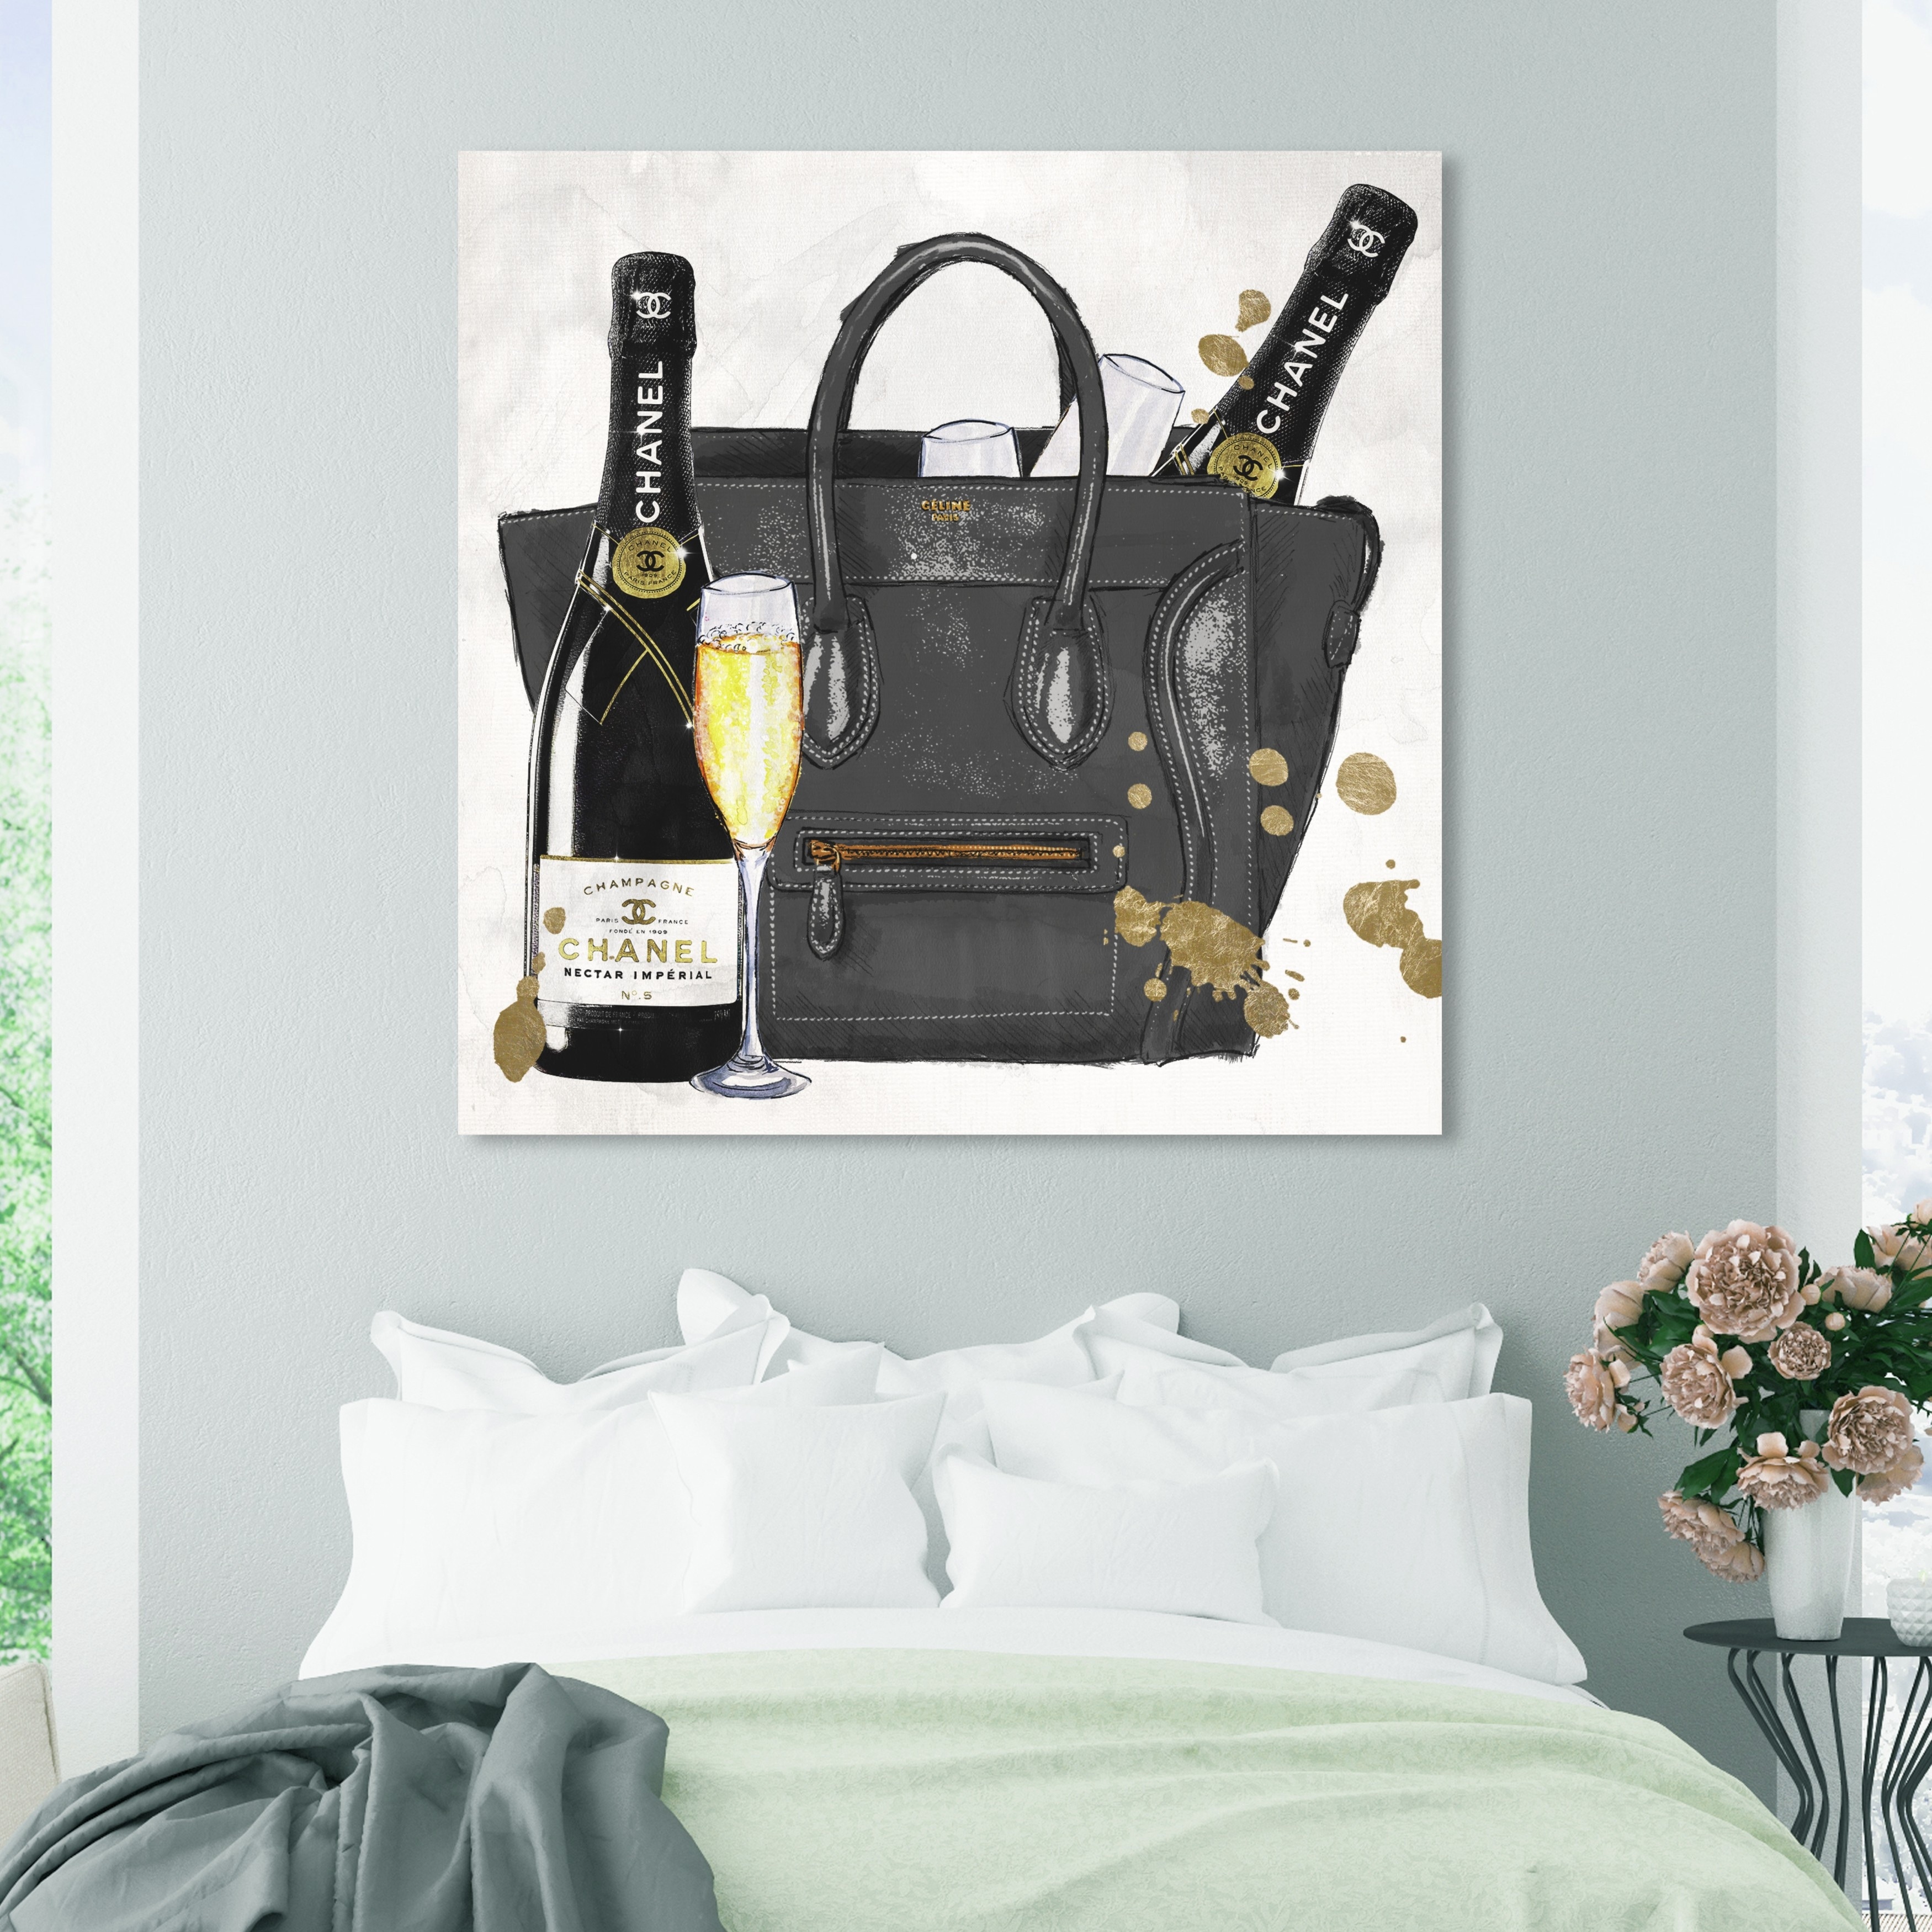 Oliver Gal 'I Brought The Champagne' Fashion and Glam Wall Art Canvas Print  - Black, Gold - On Sale - Bed Bath & Beyond - 18219357